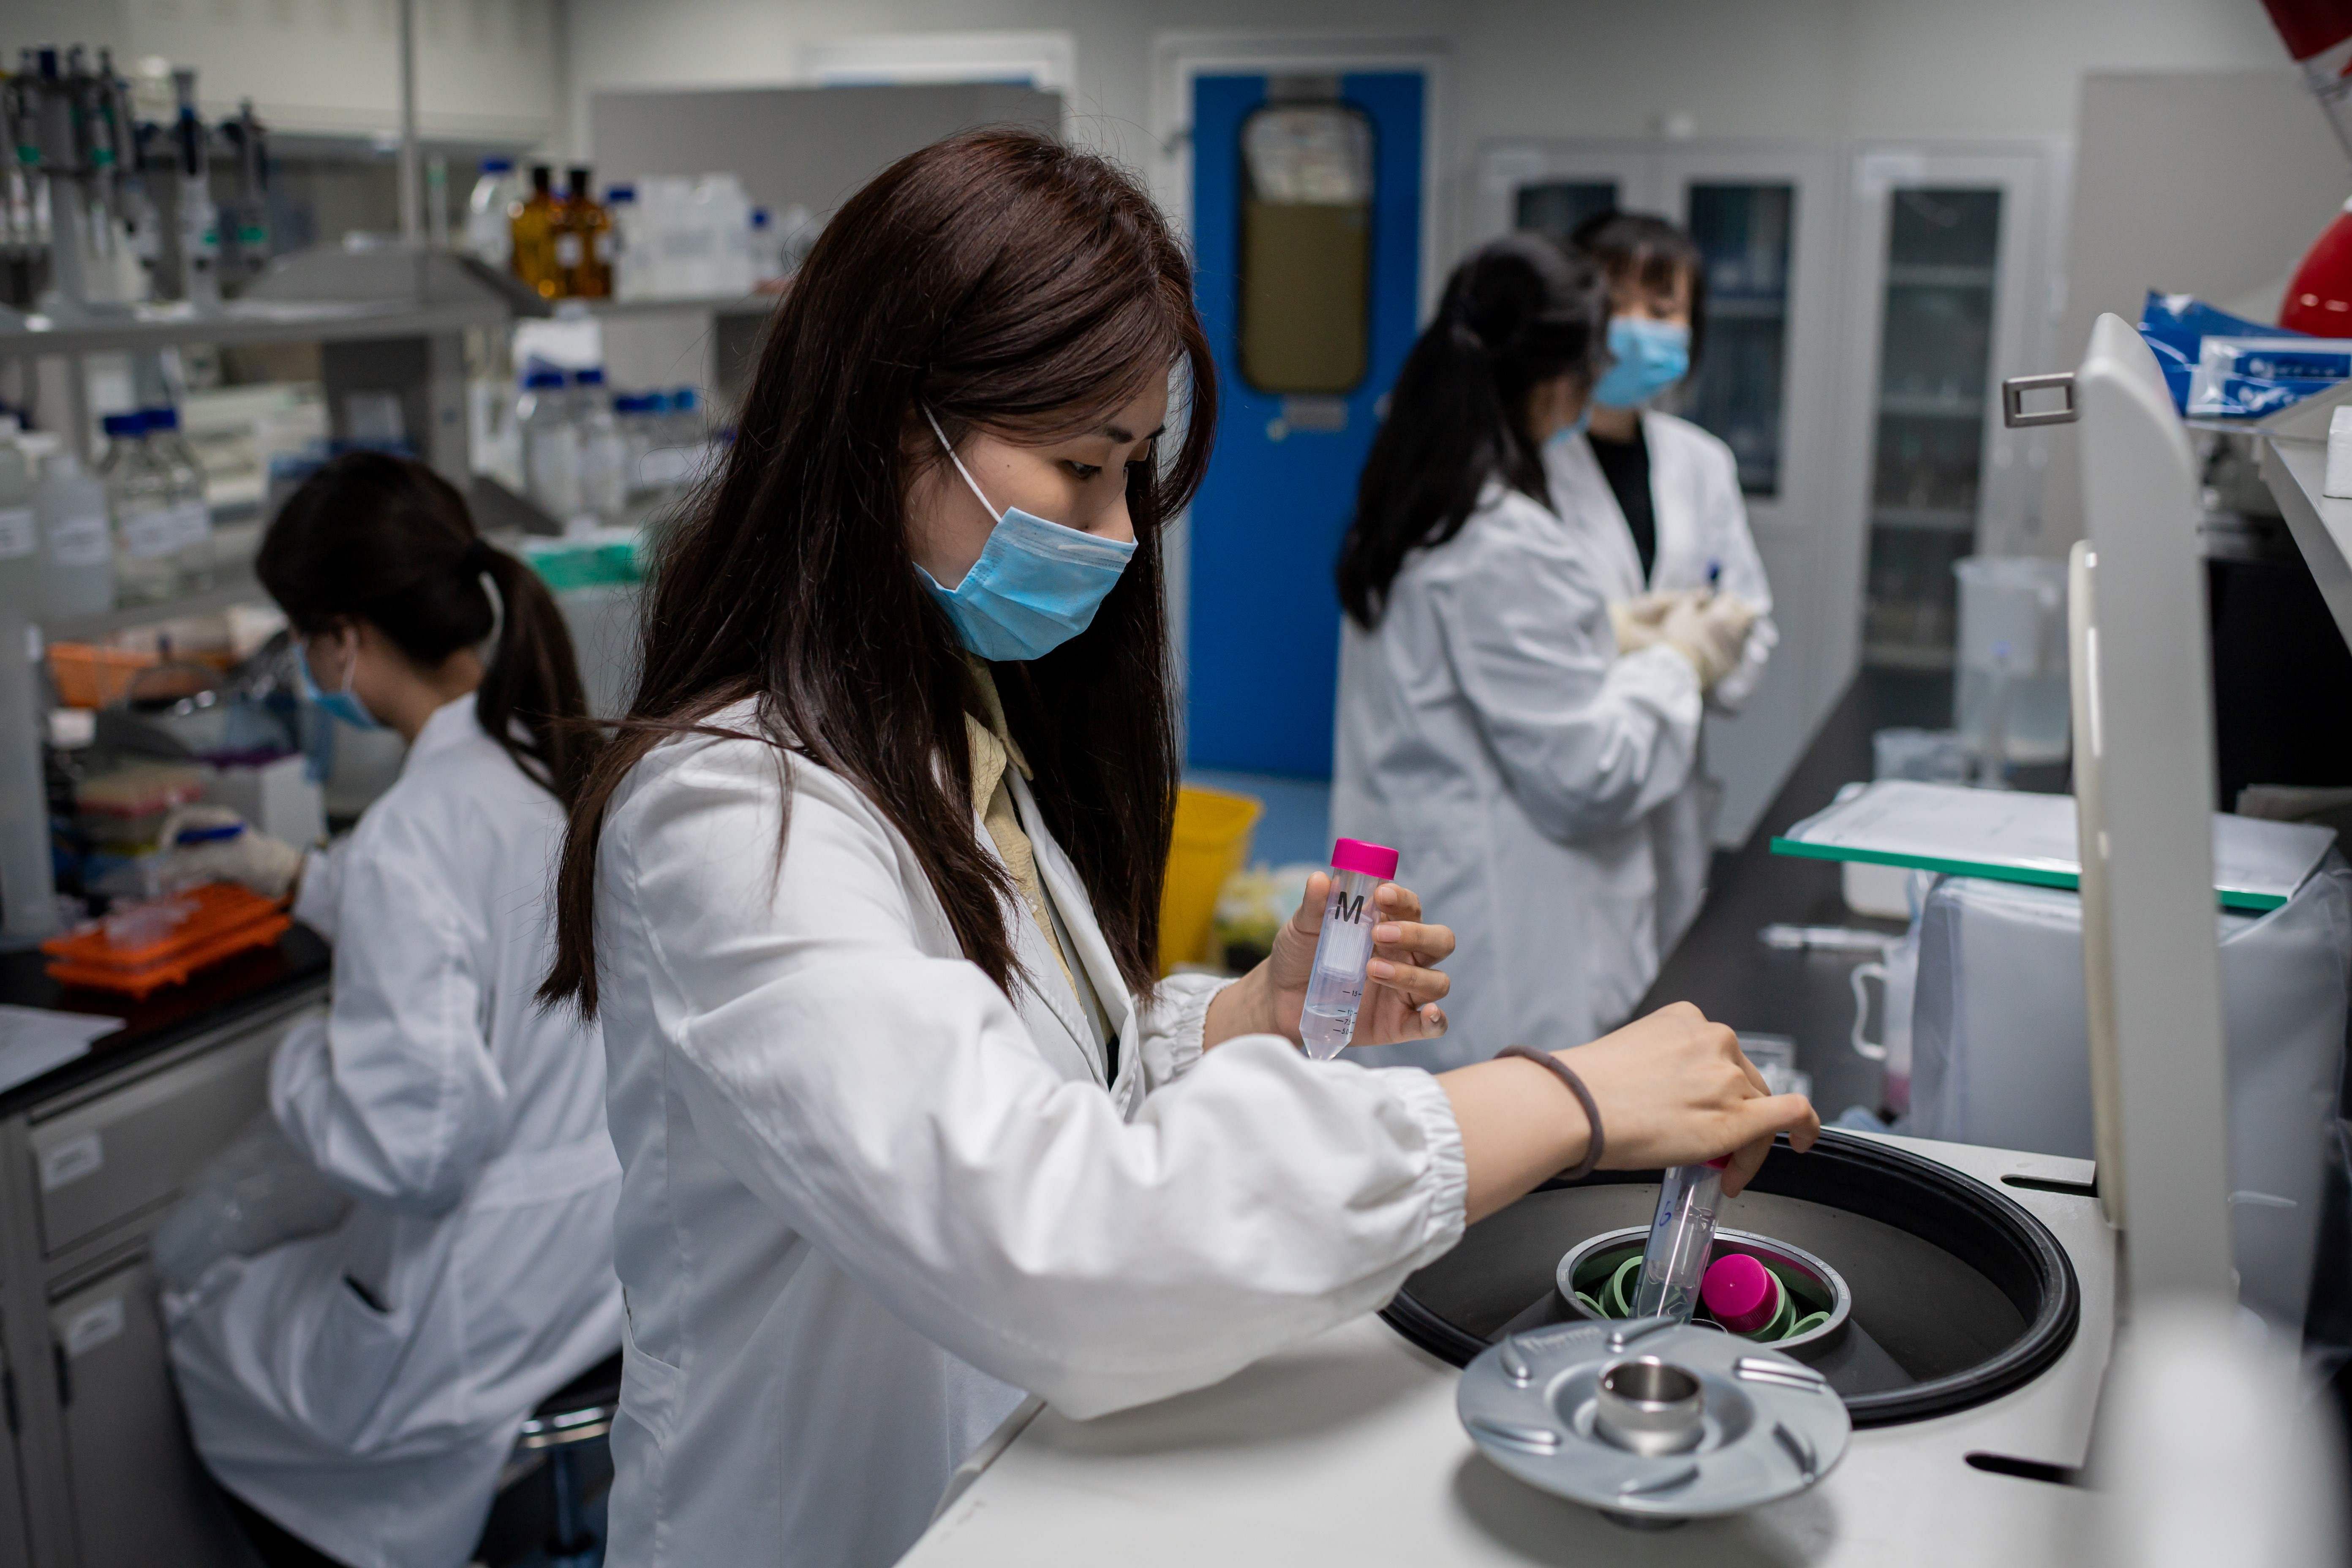 Engineers work on an experimental vaccine for the COVID-19 coronavirus at the Quality Control Laboratory at the Sinovac Biotech facilities in Beijing. - Sinovac Biotech, which is conducting one of the four clinical trials that have been authorised in China. (AFP Photo)